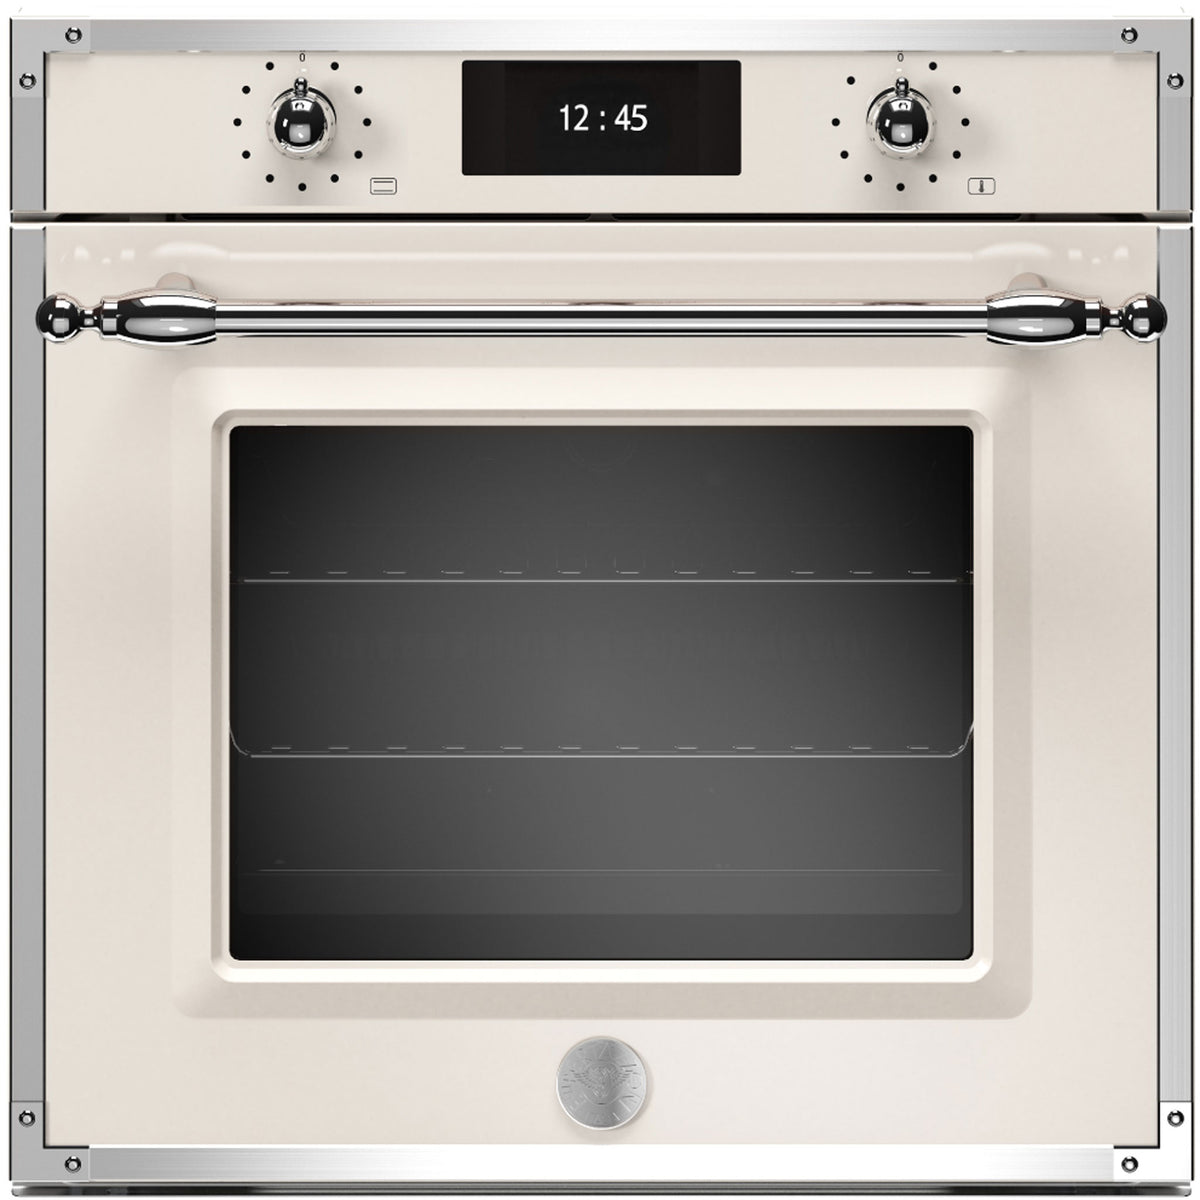 BERTAZZONI F6011HERVPTAX 60cm Electric Multifunction Oven with steam cooking and Pyrolytic cleaning in Stainless Steel